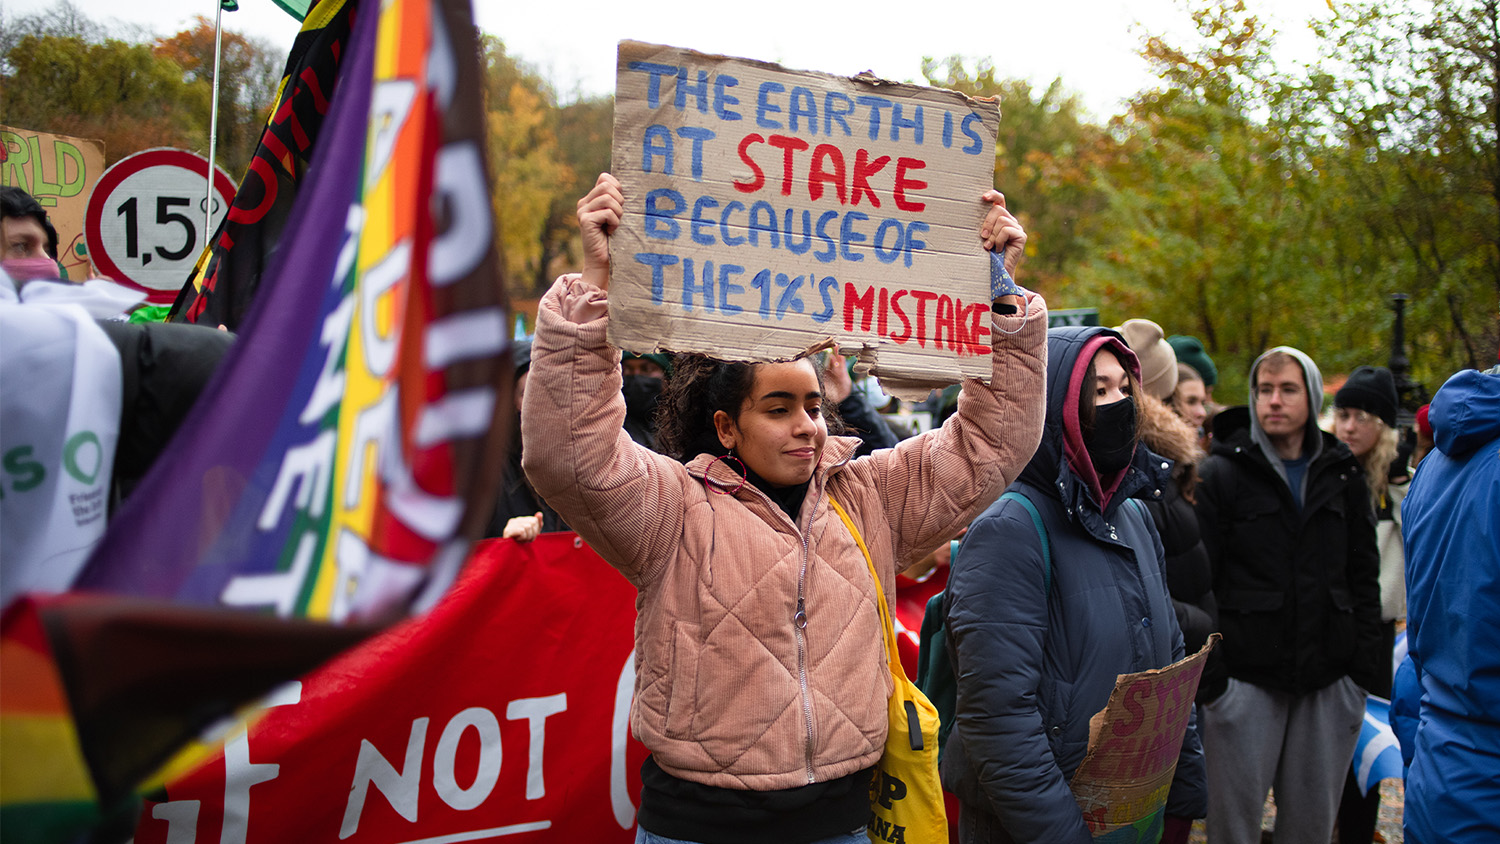 Image of a protest with a person holding up a placard that reads: the earth is at stake because of the 1%'s mistake 